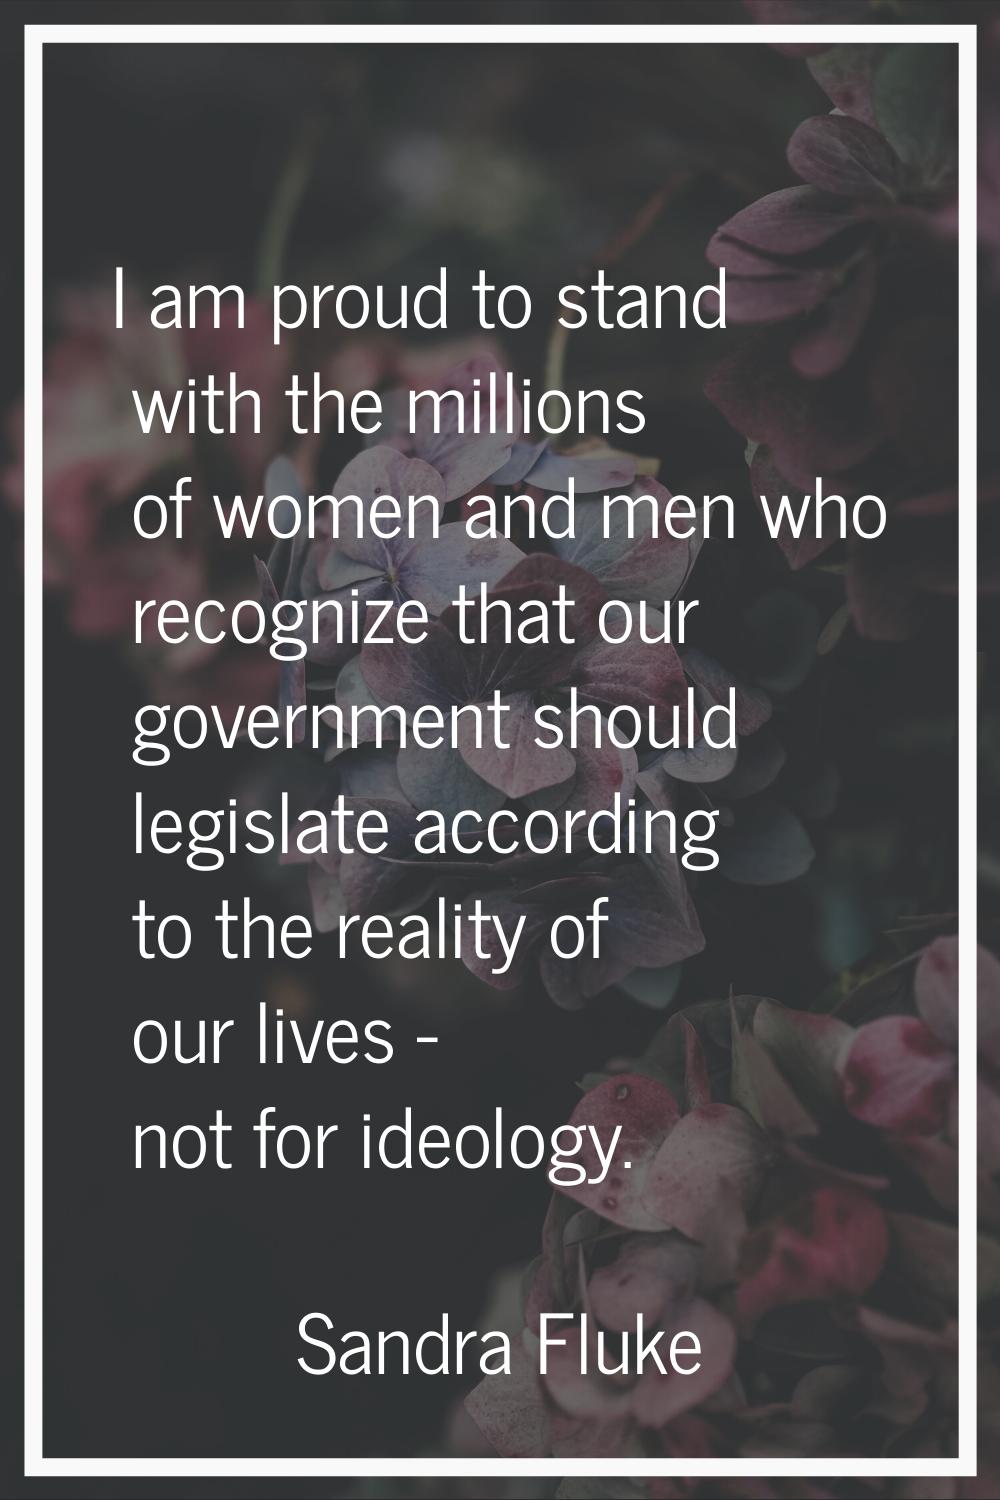 I am proud to stand with the millions of women and men who recognize that our government should leg